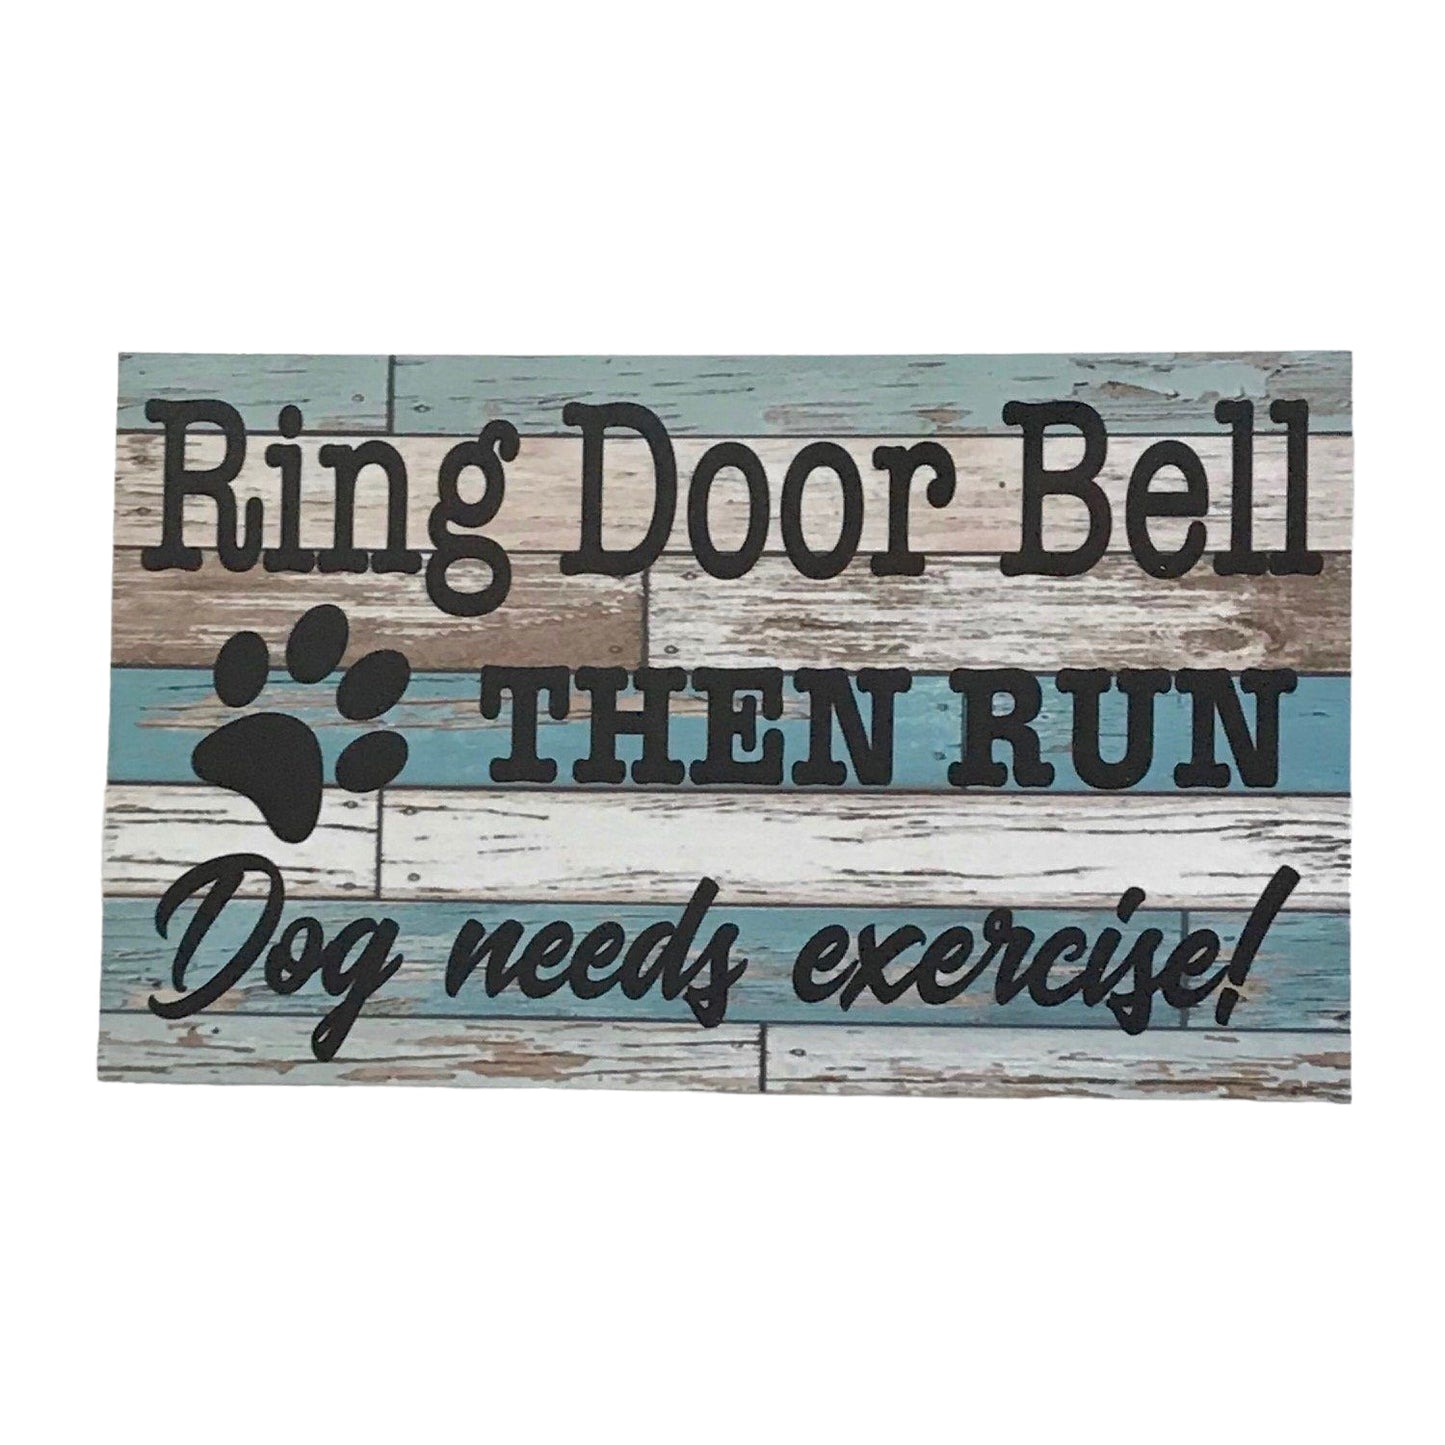 Ring Door Bell Run Dog Needs Exercise Sign - The Renmy Store Homewares & Gifts 